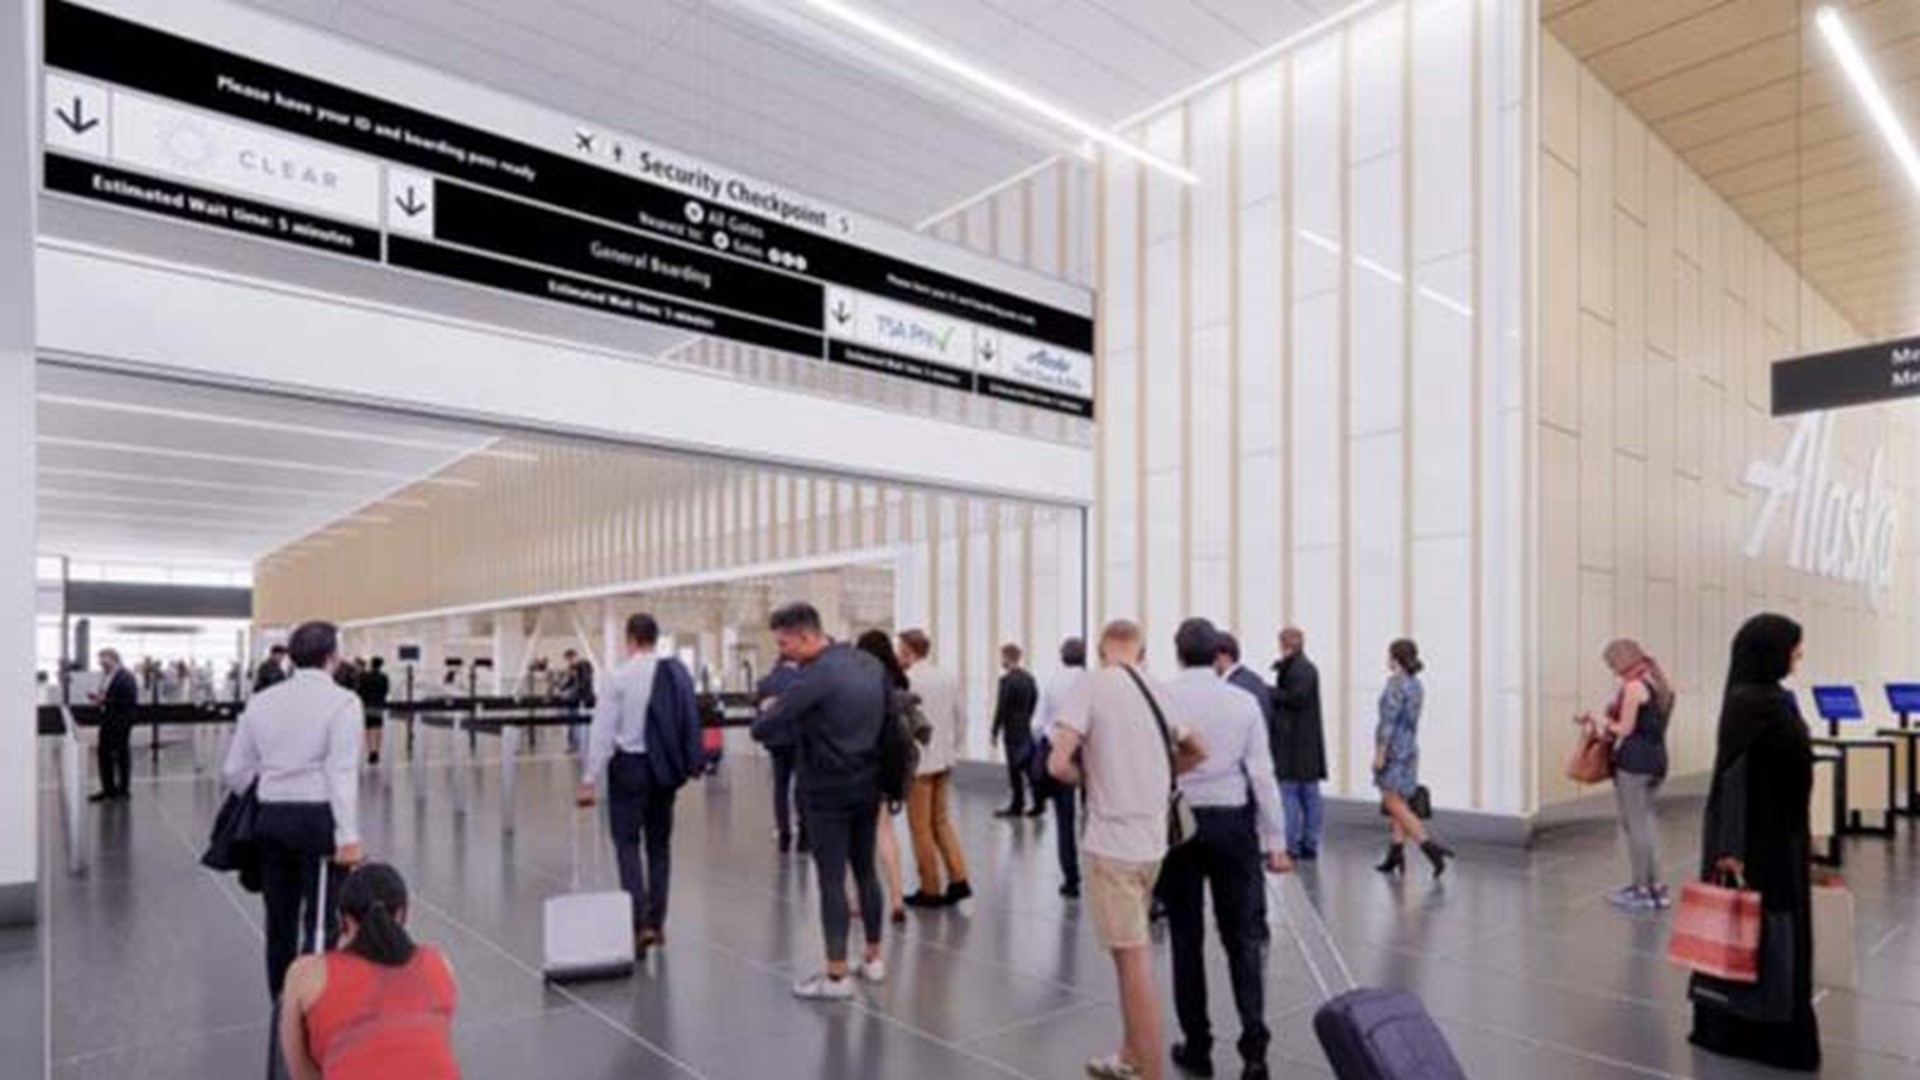 Security lines in the north end terminal will increase to six lanes, which the airport hopes will improve passenger processing.